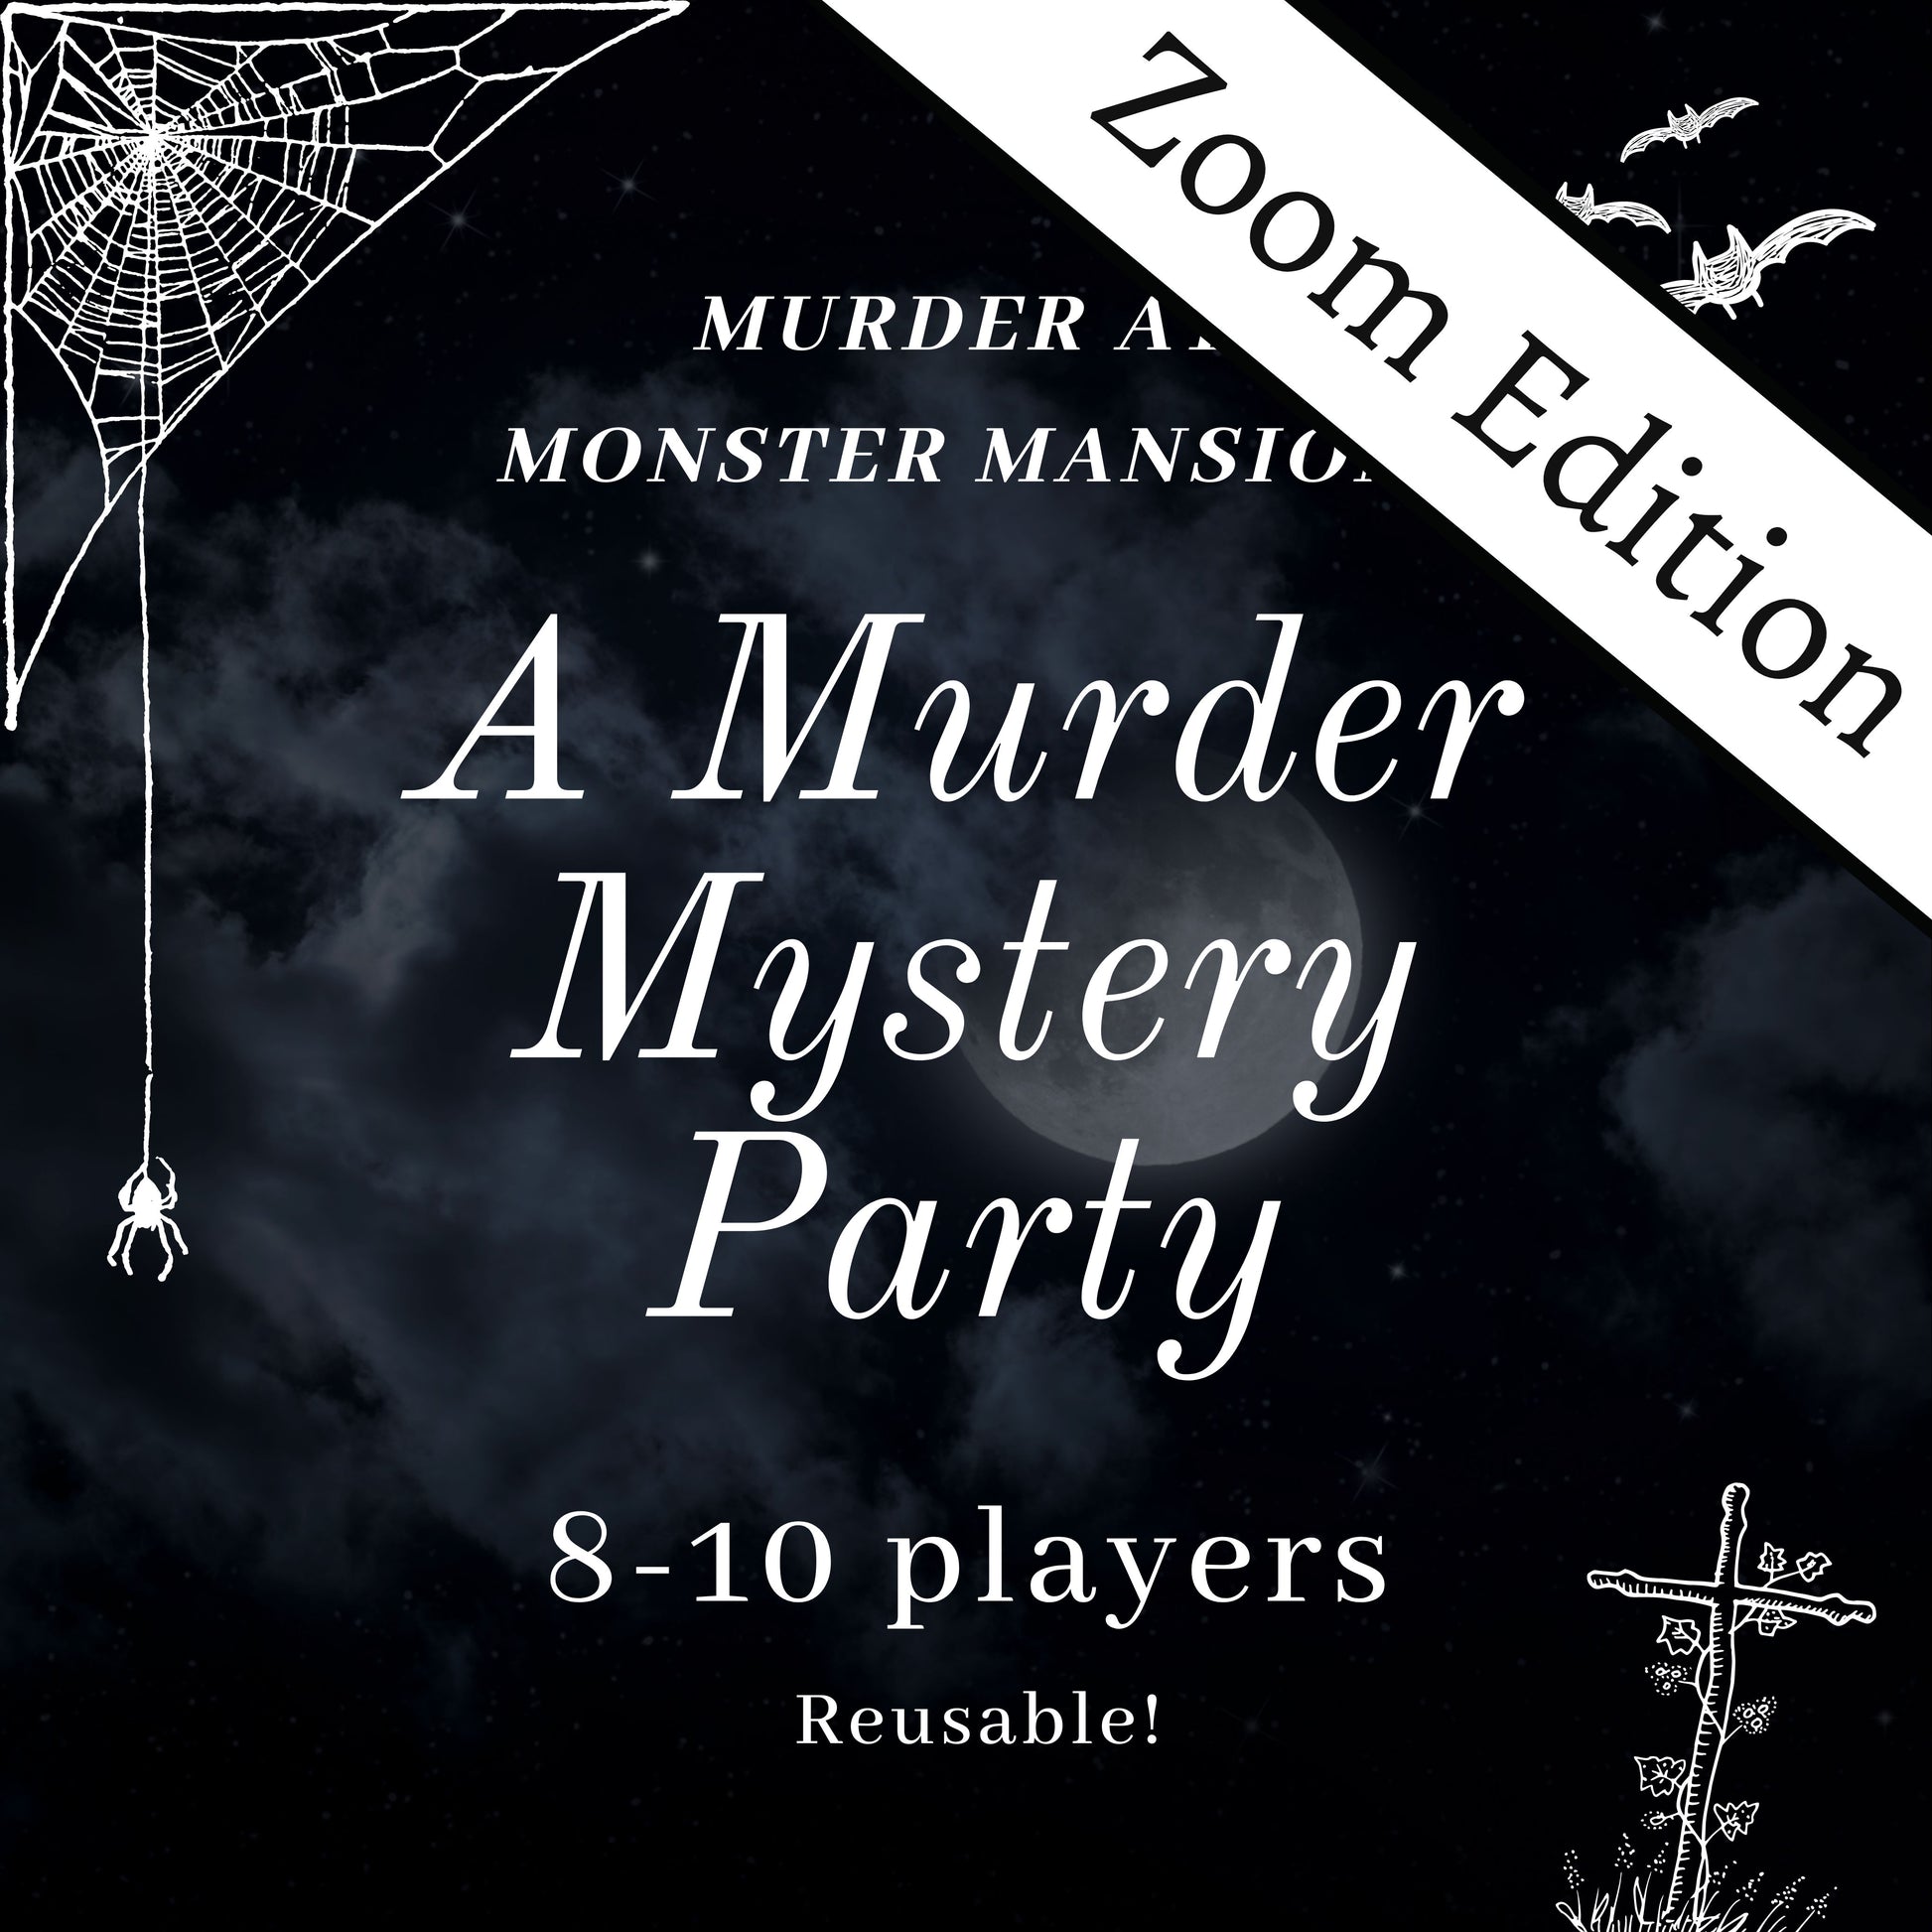 Fun and colourful fully scripted Monster Mansion themed murder mystery party game for 8-10 players